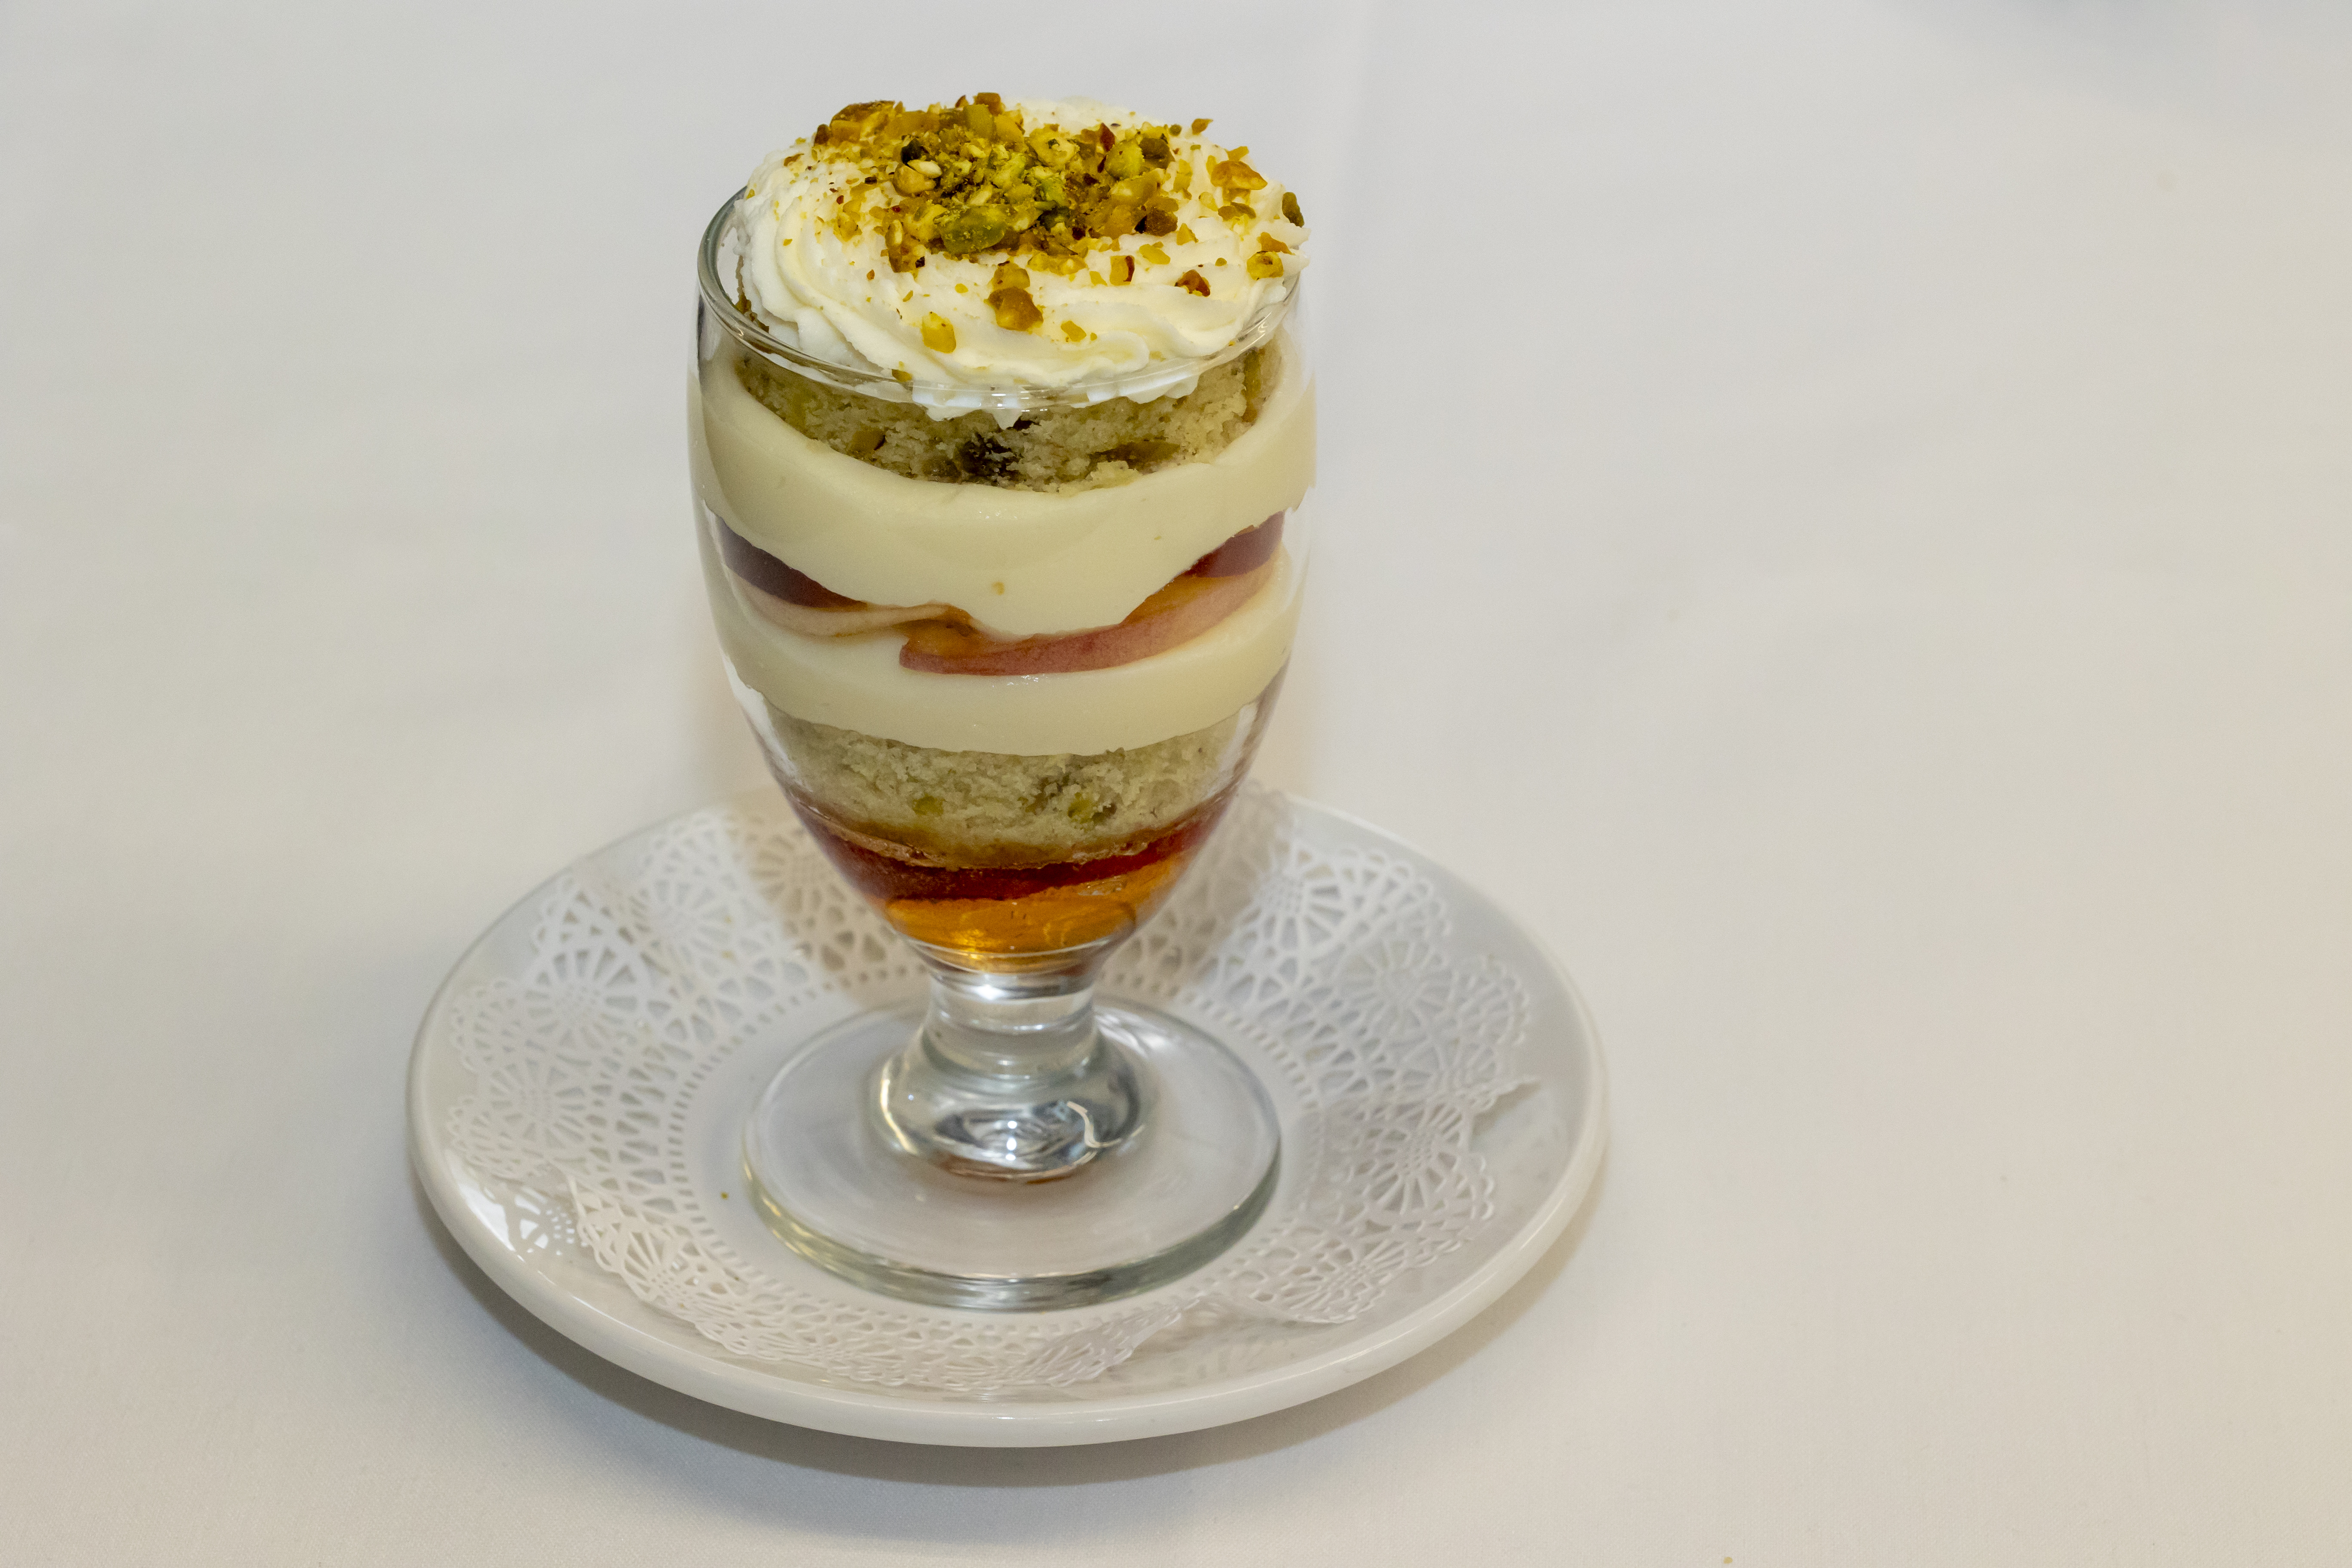 Stone Fruit and Berry Trifle with Pistachios